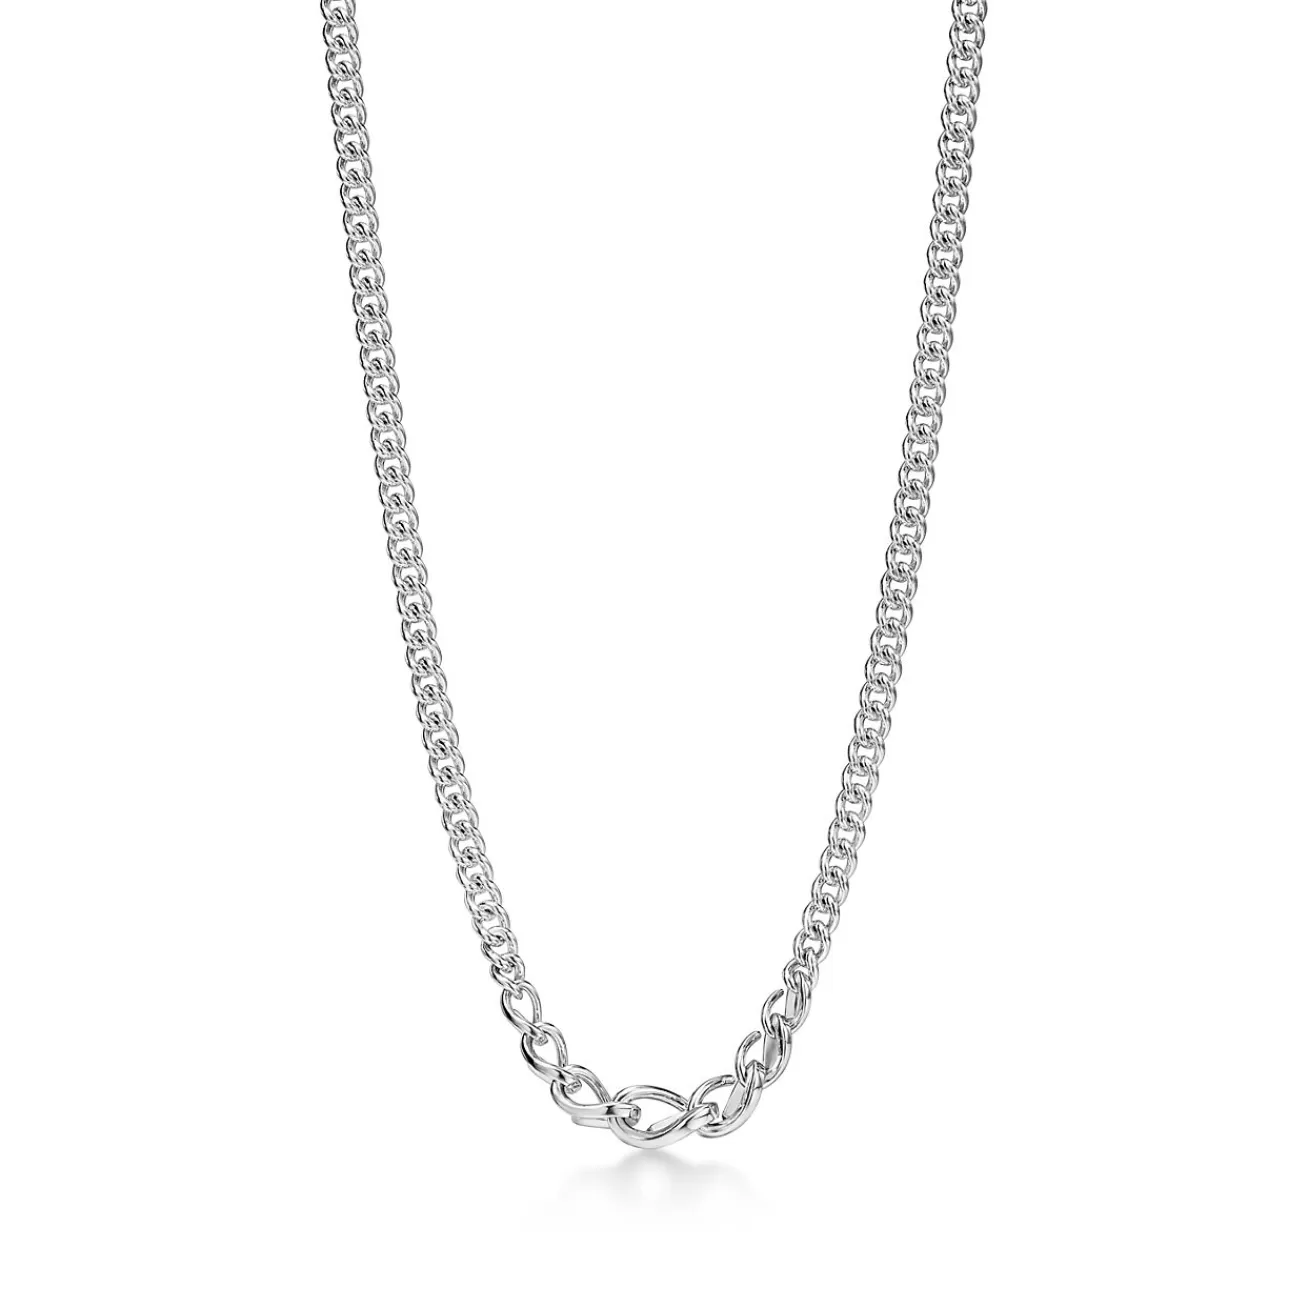 Tiffany & Co. Tiffany Forge Graduated Link Necklace in High-polished Sterling Silver | ^ Necklaces & Pendants | Men's Jewelry